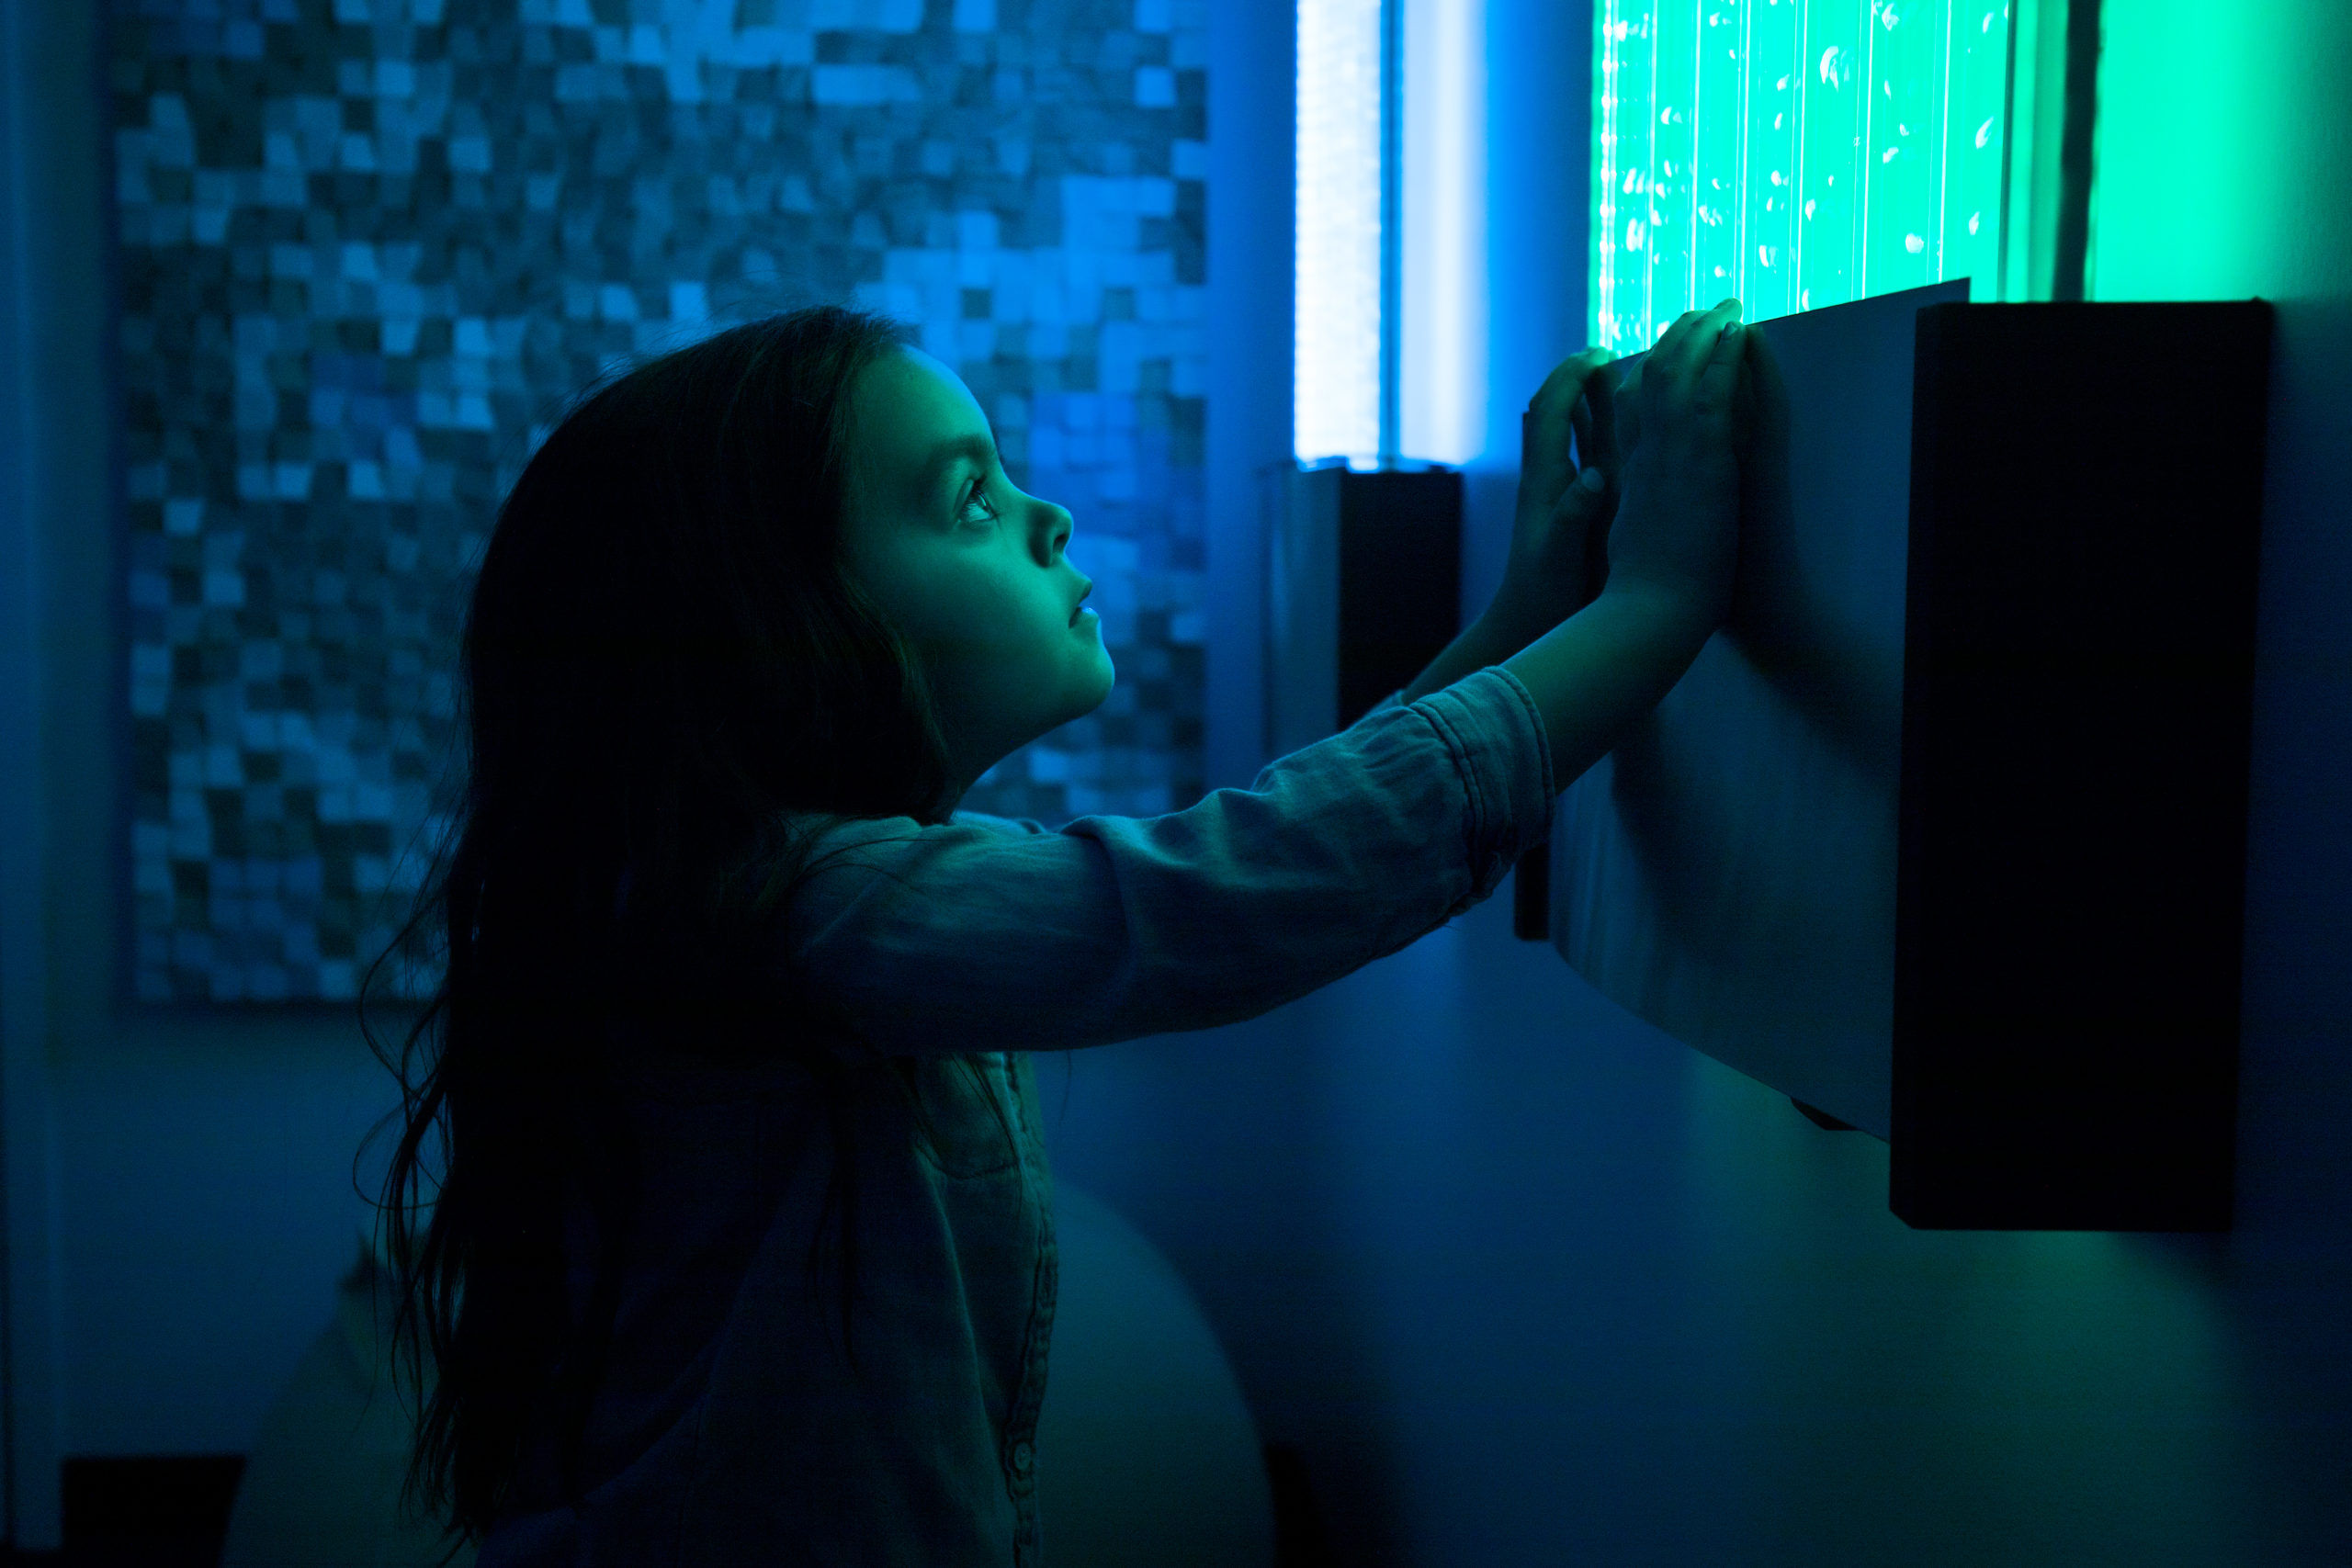 A child uses a sensory room, safe with the help of Corporate event security